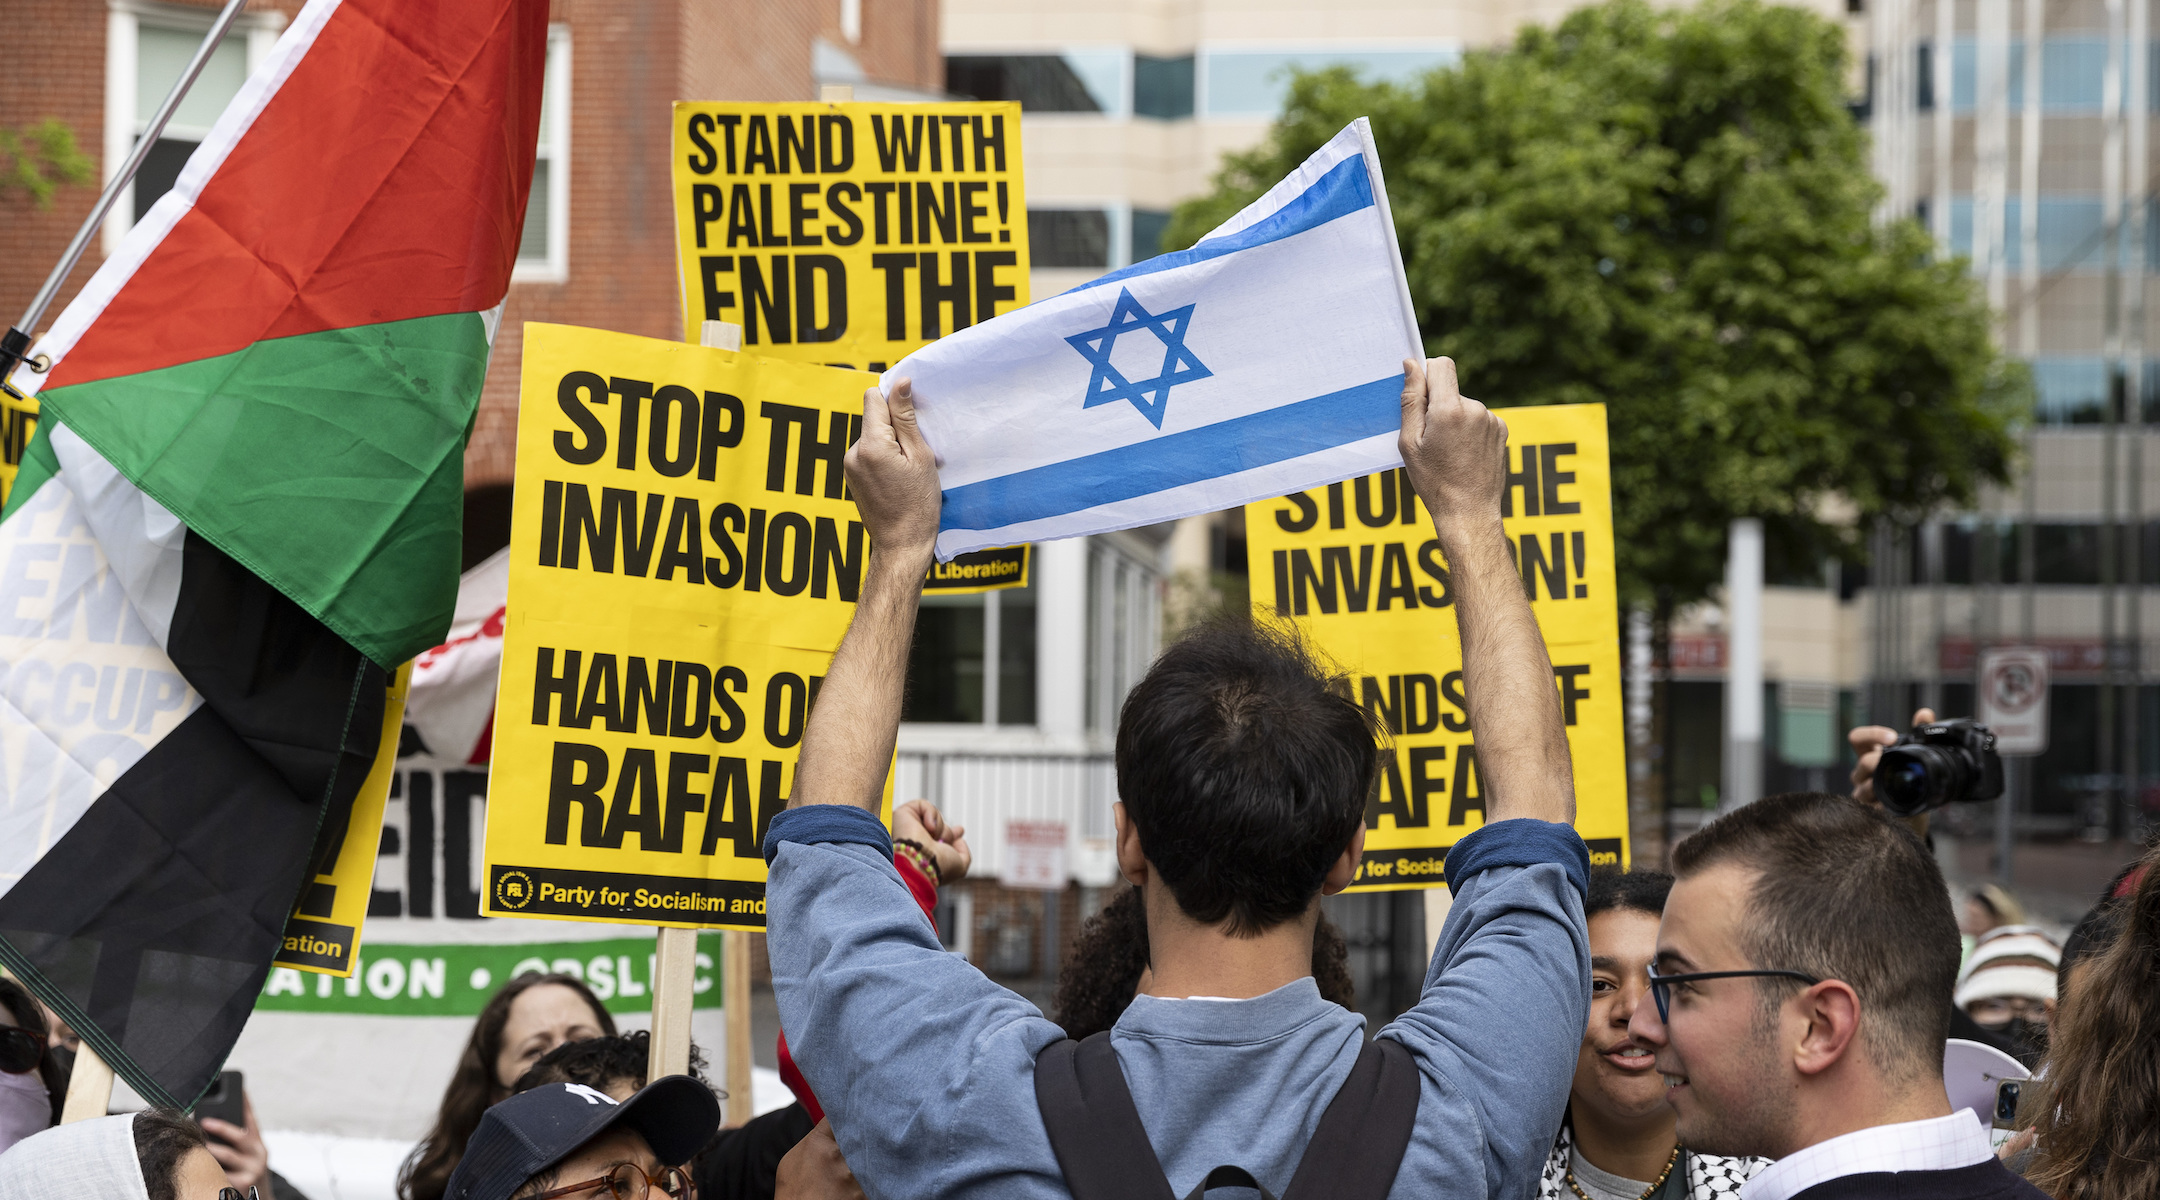 A man holding a pro-Israel flag facing a crowd holding pro-Palestinian flags